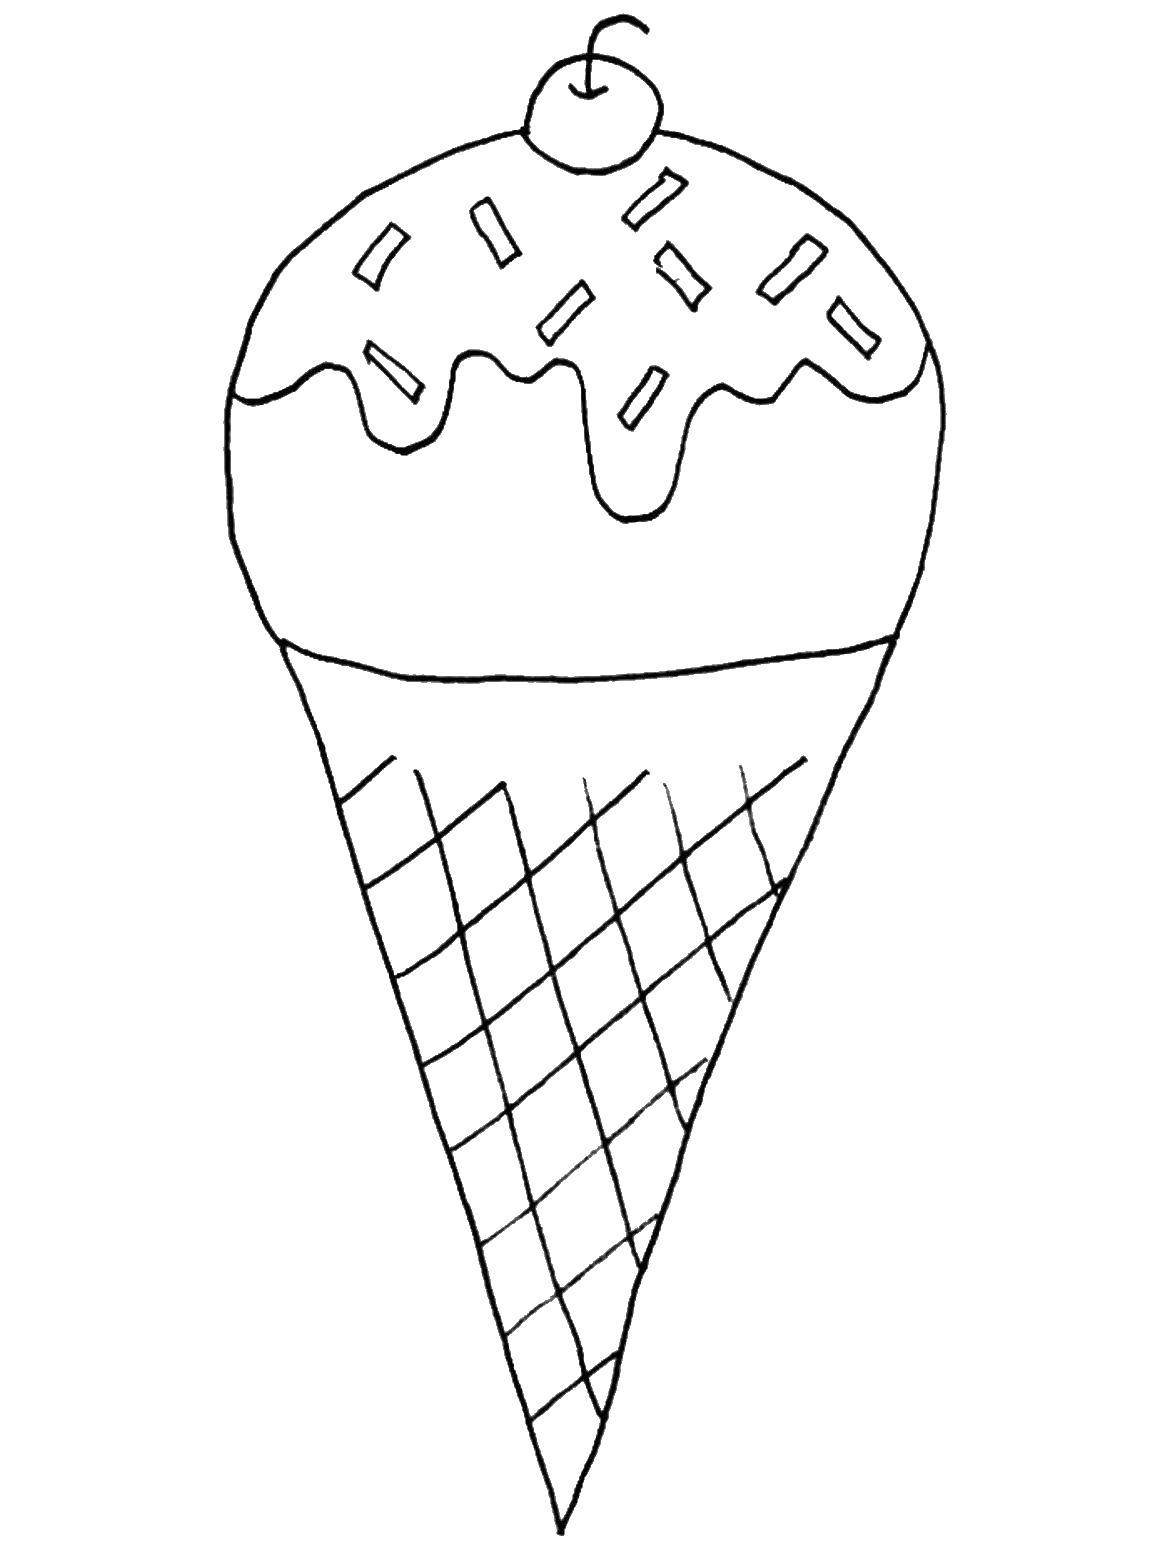 Coloring Ice cream with a cherry. Category ice cream. Tags:  ice cream, ball ice cream.